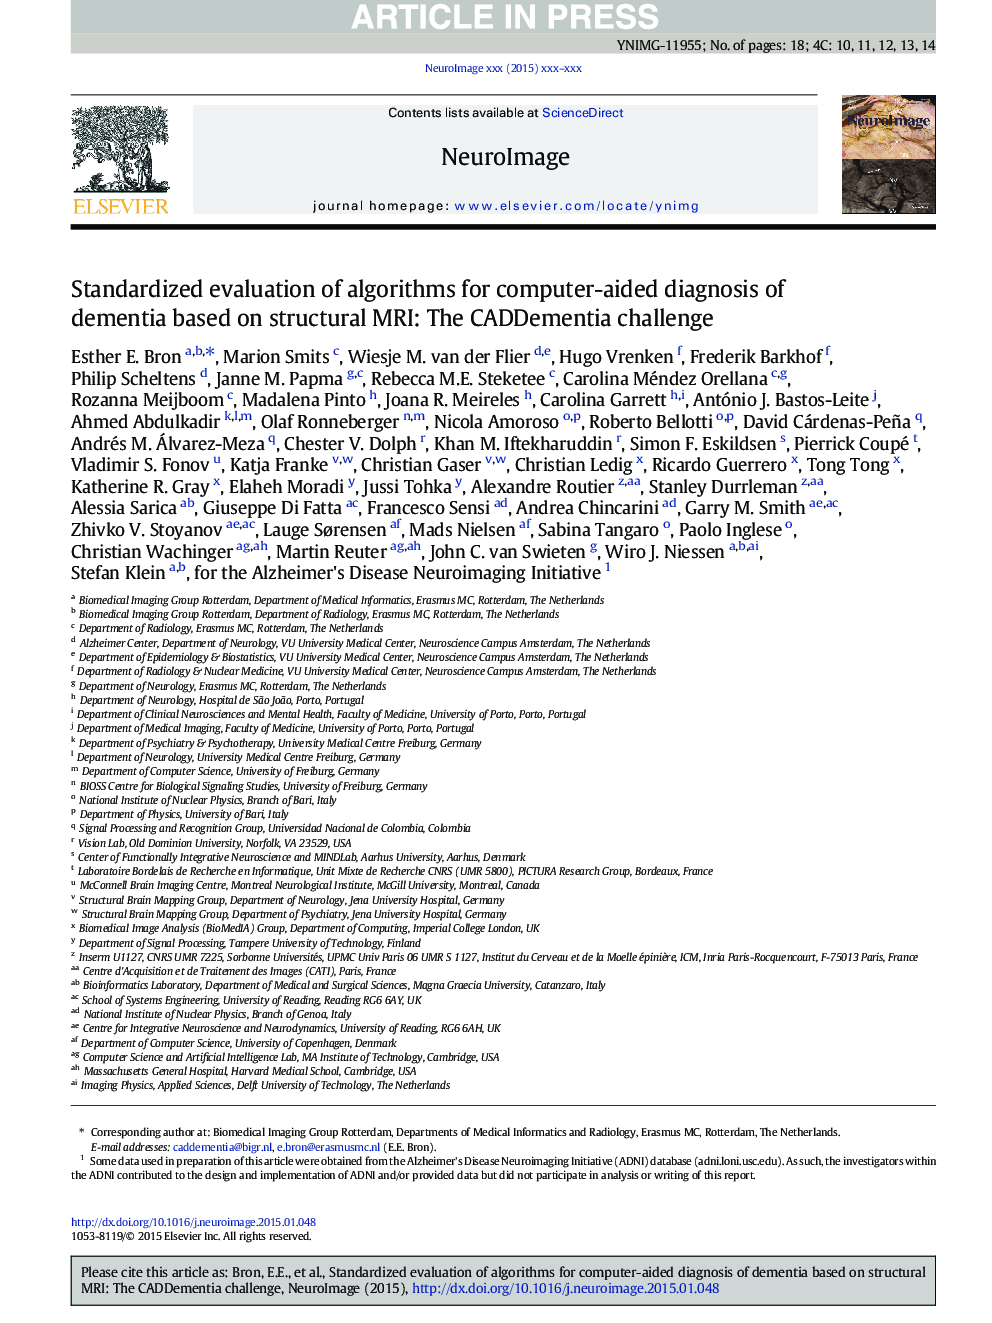 Standardized evaluation of algorithms for computer-aided diagnosis of dementia based on structural MRI: The CADDementia challenge